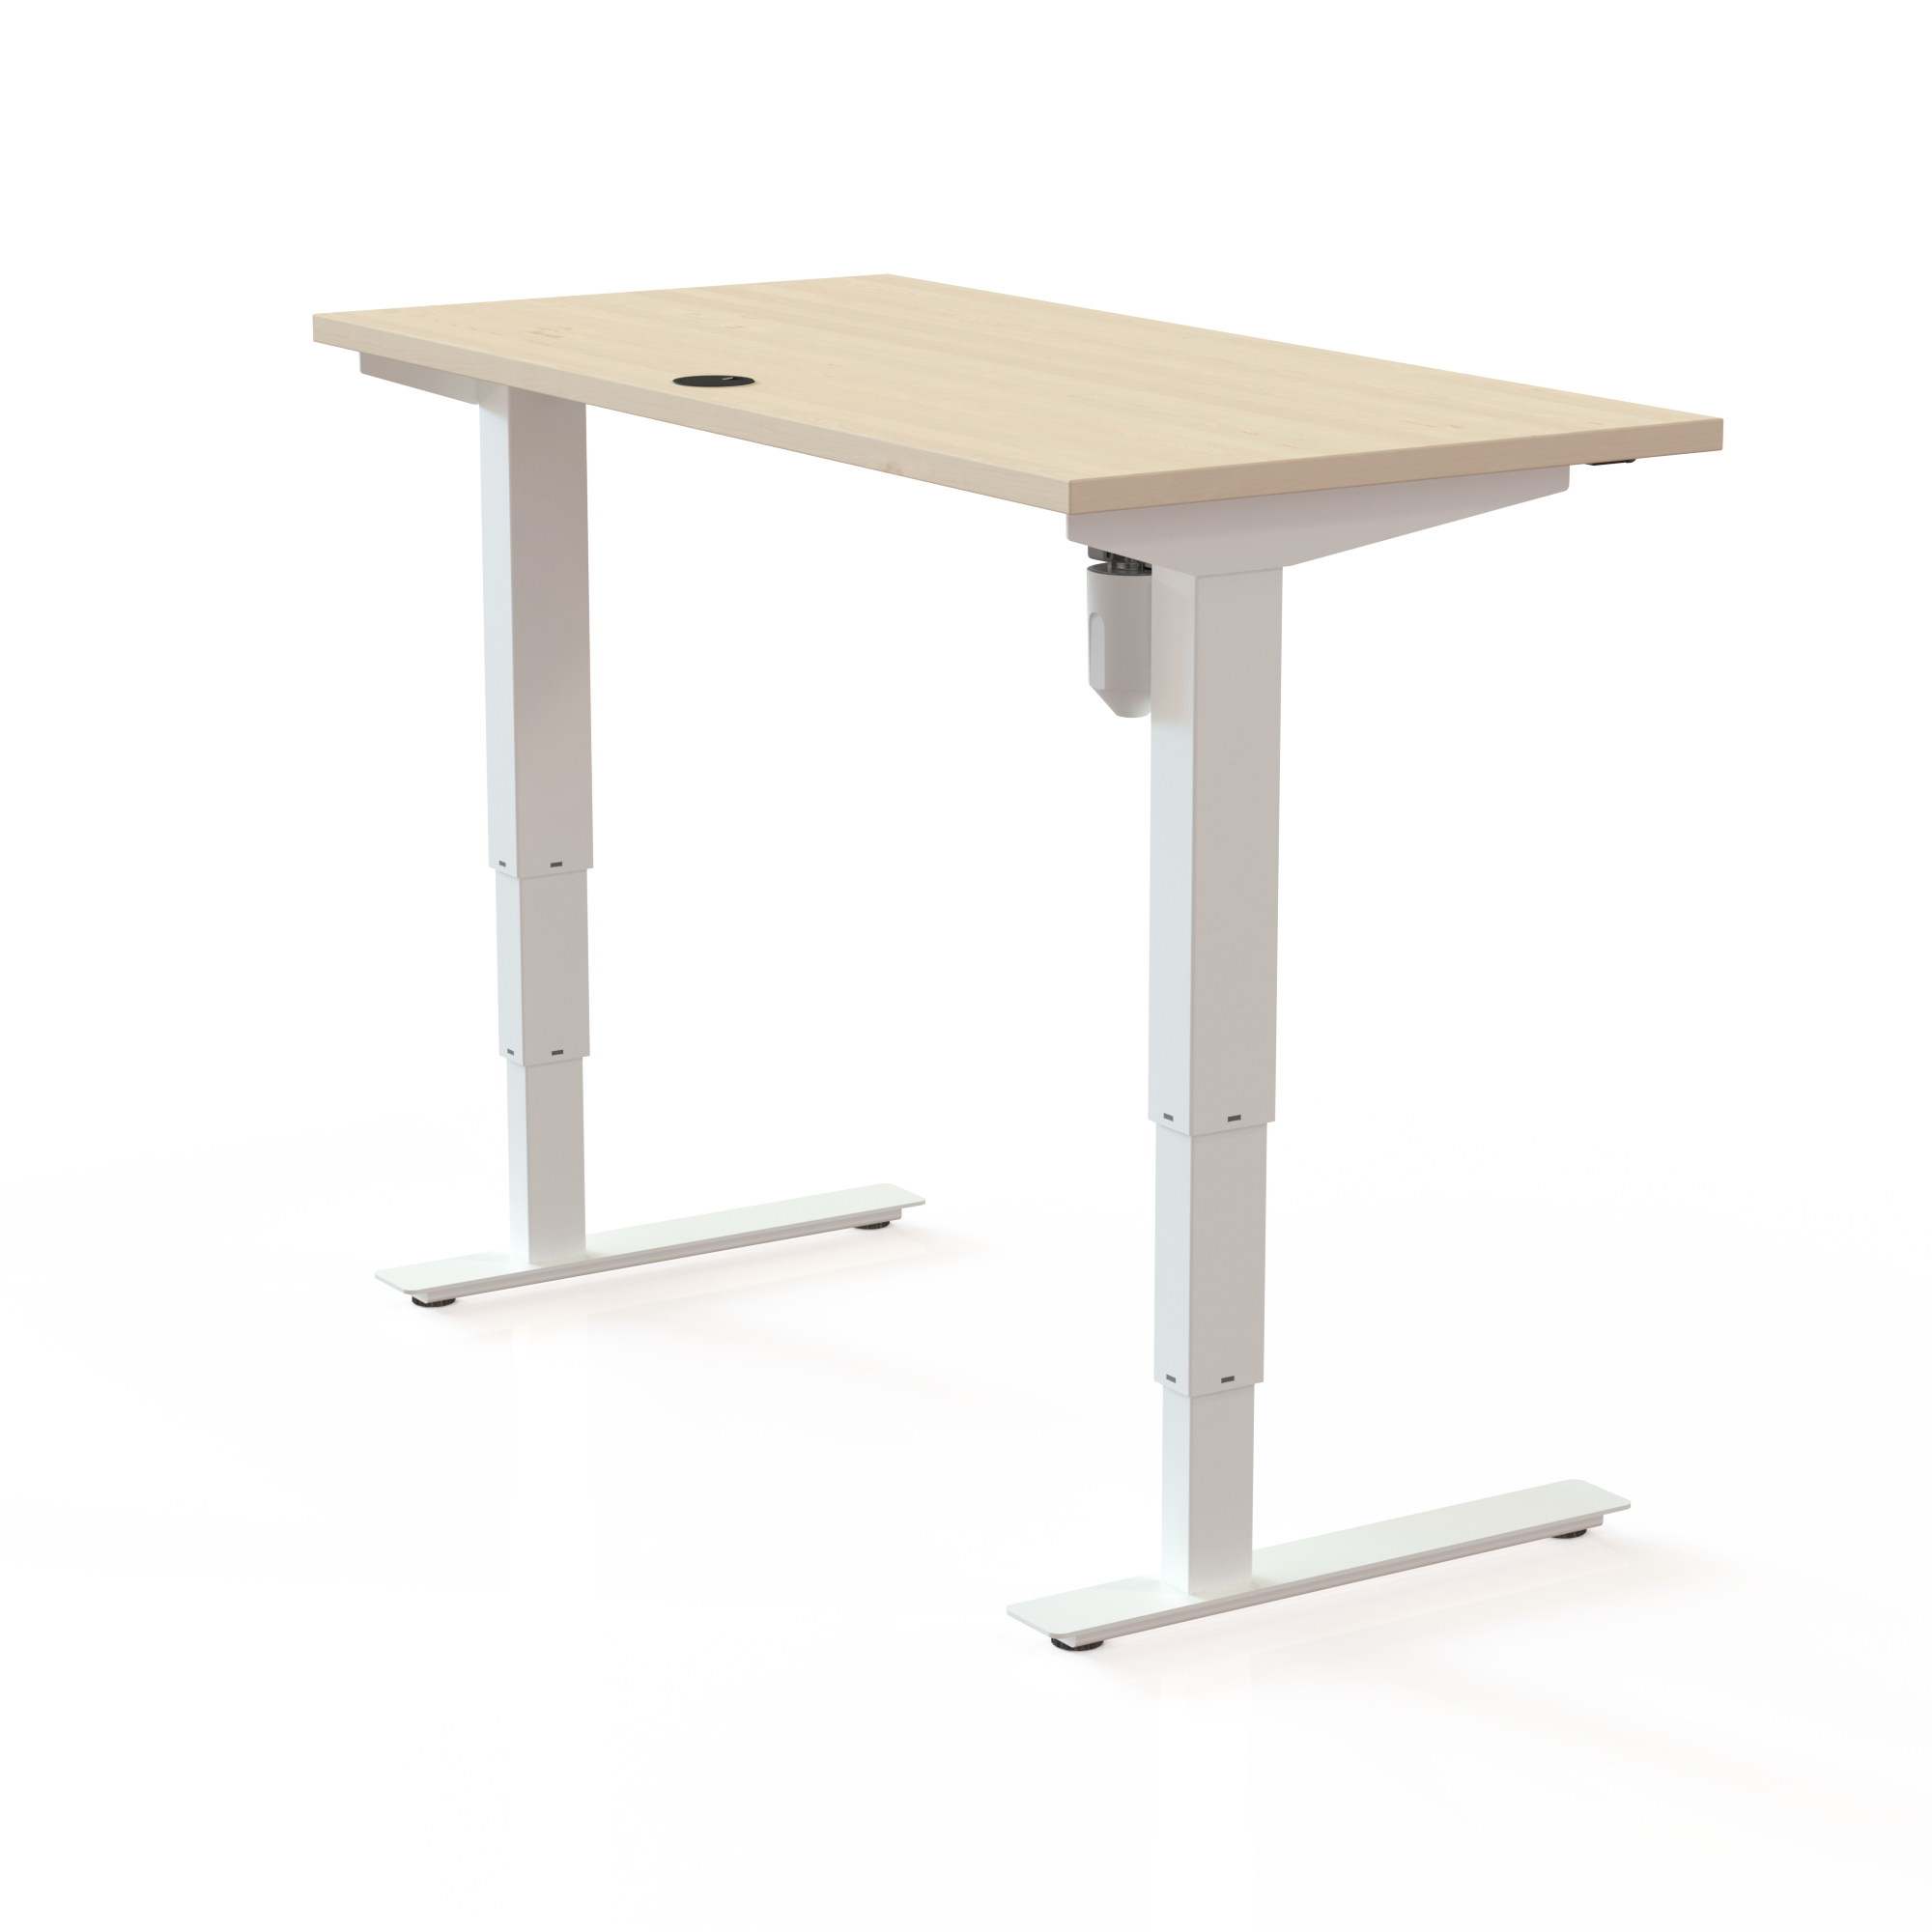 Electric Adjustable Desk | 120x60 cm | Maple with white frame